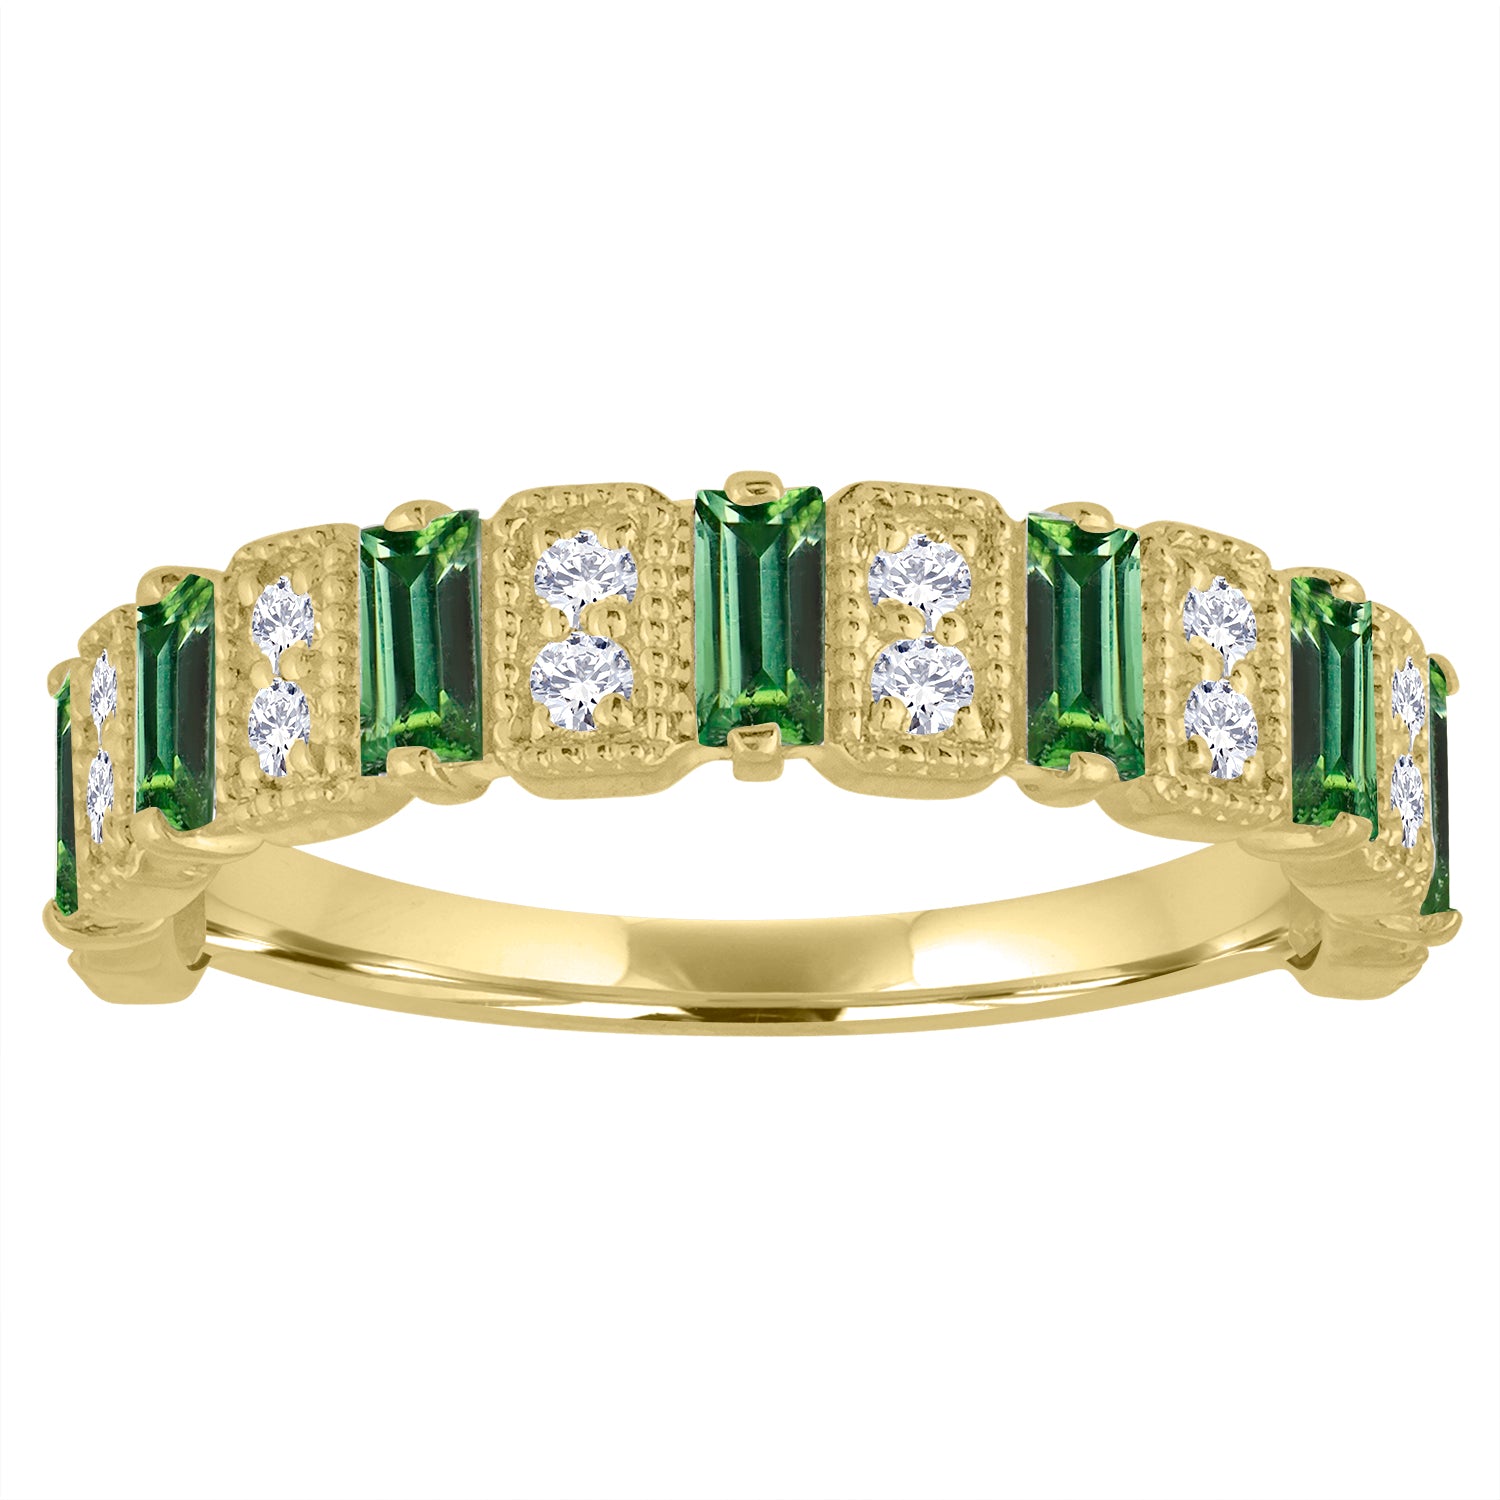 Yellow gold wide band with emerald baguettes and round diamonds.